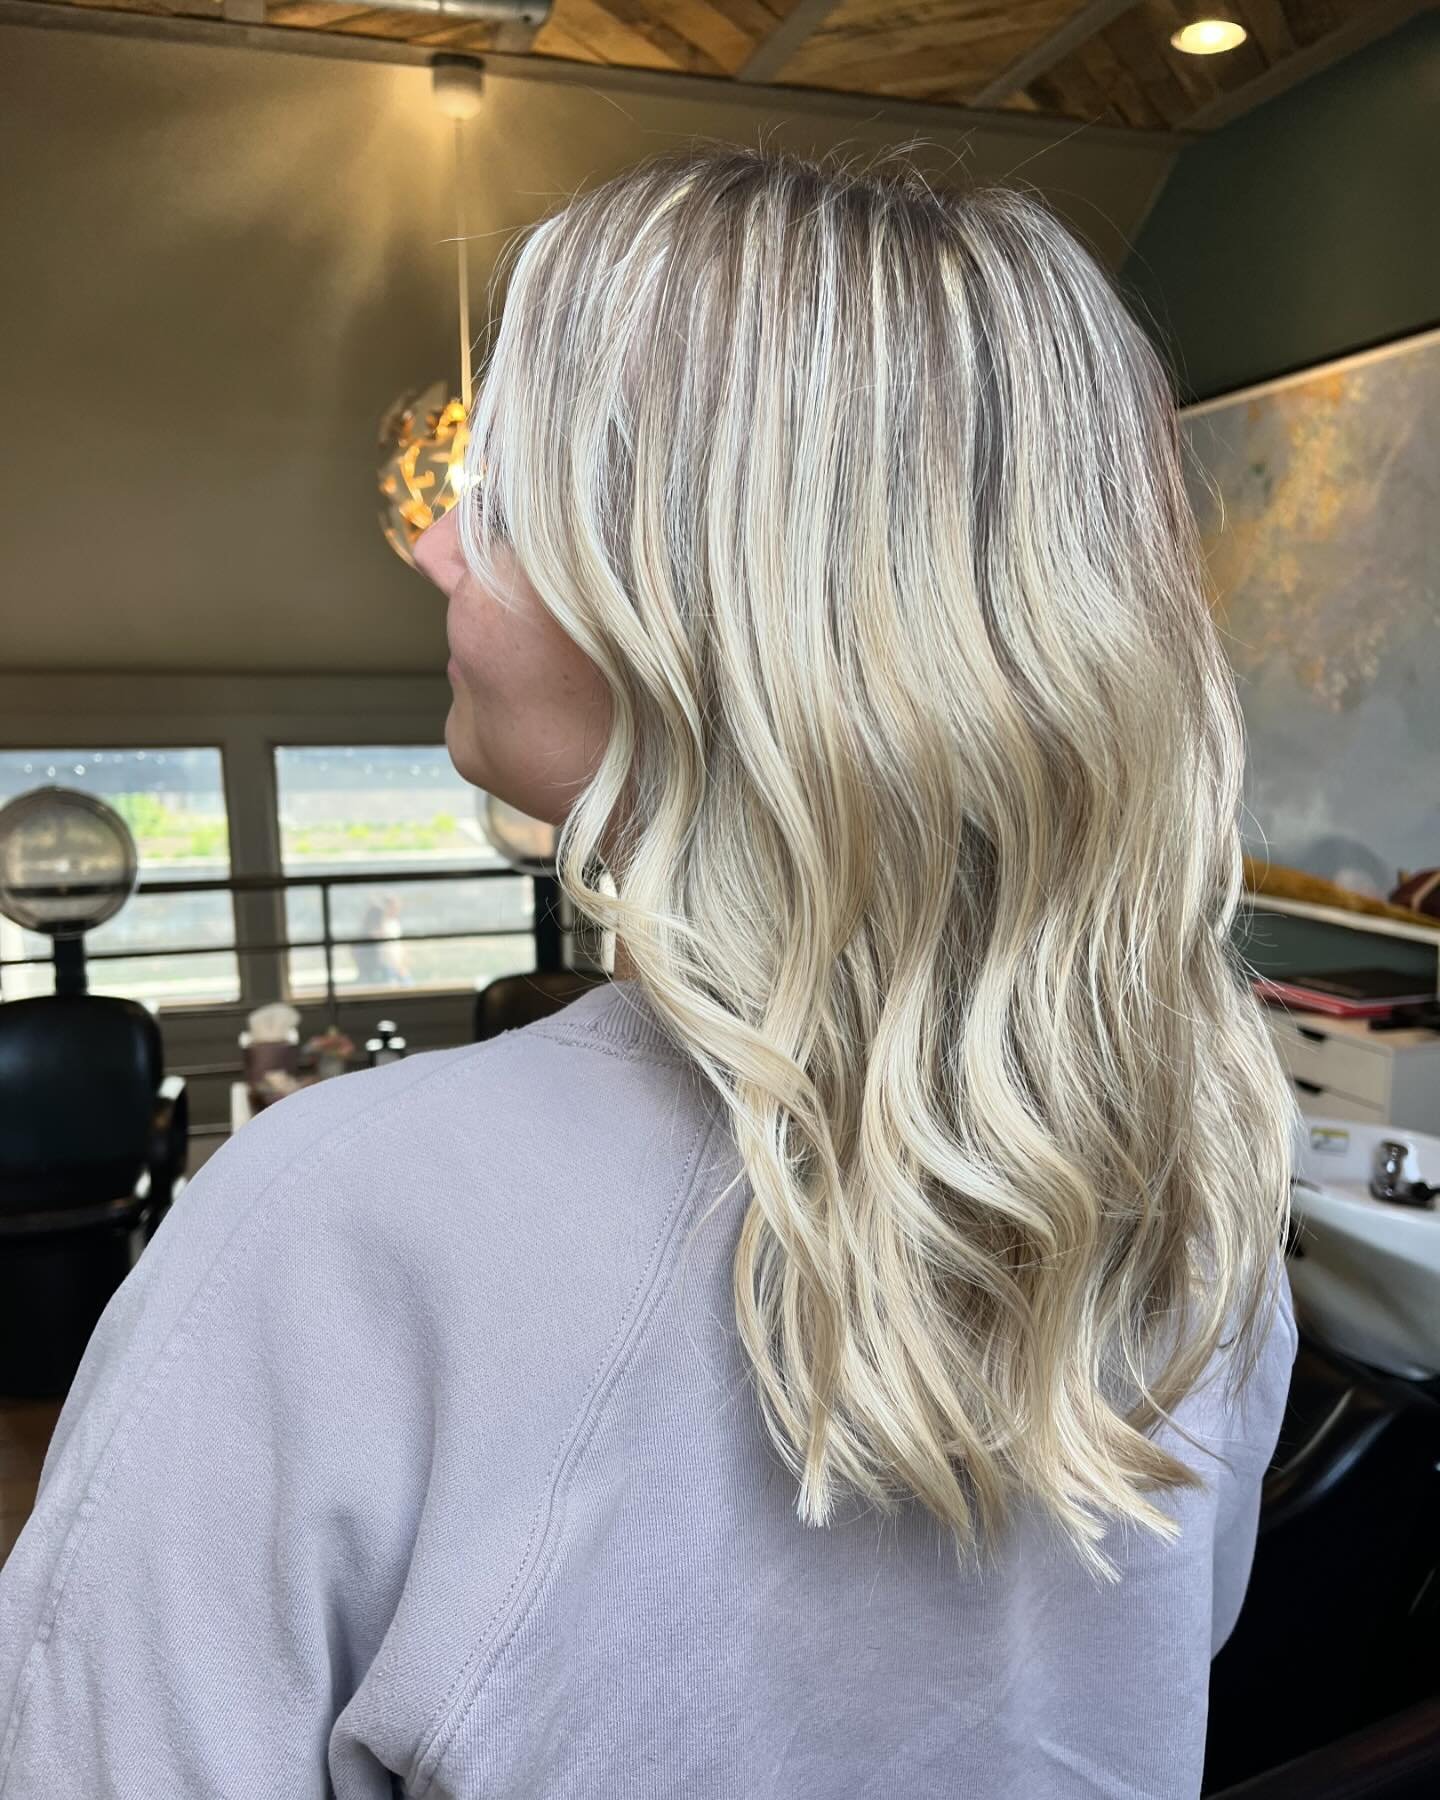 💛🪄The amount of dimension a highlight can give to your hair should be illegal 🪄💛
Styled by: @kelsey_six 
.
.
.
.
.

#highlightedhair #lowlights #dimensionalhair #dimensionalblonde#dimensionalblondehair #marylandsalon #marylandspa #marylandhair #m